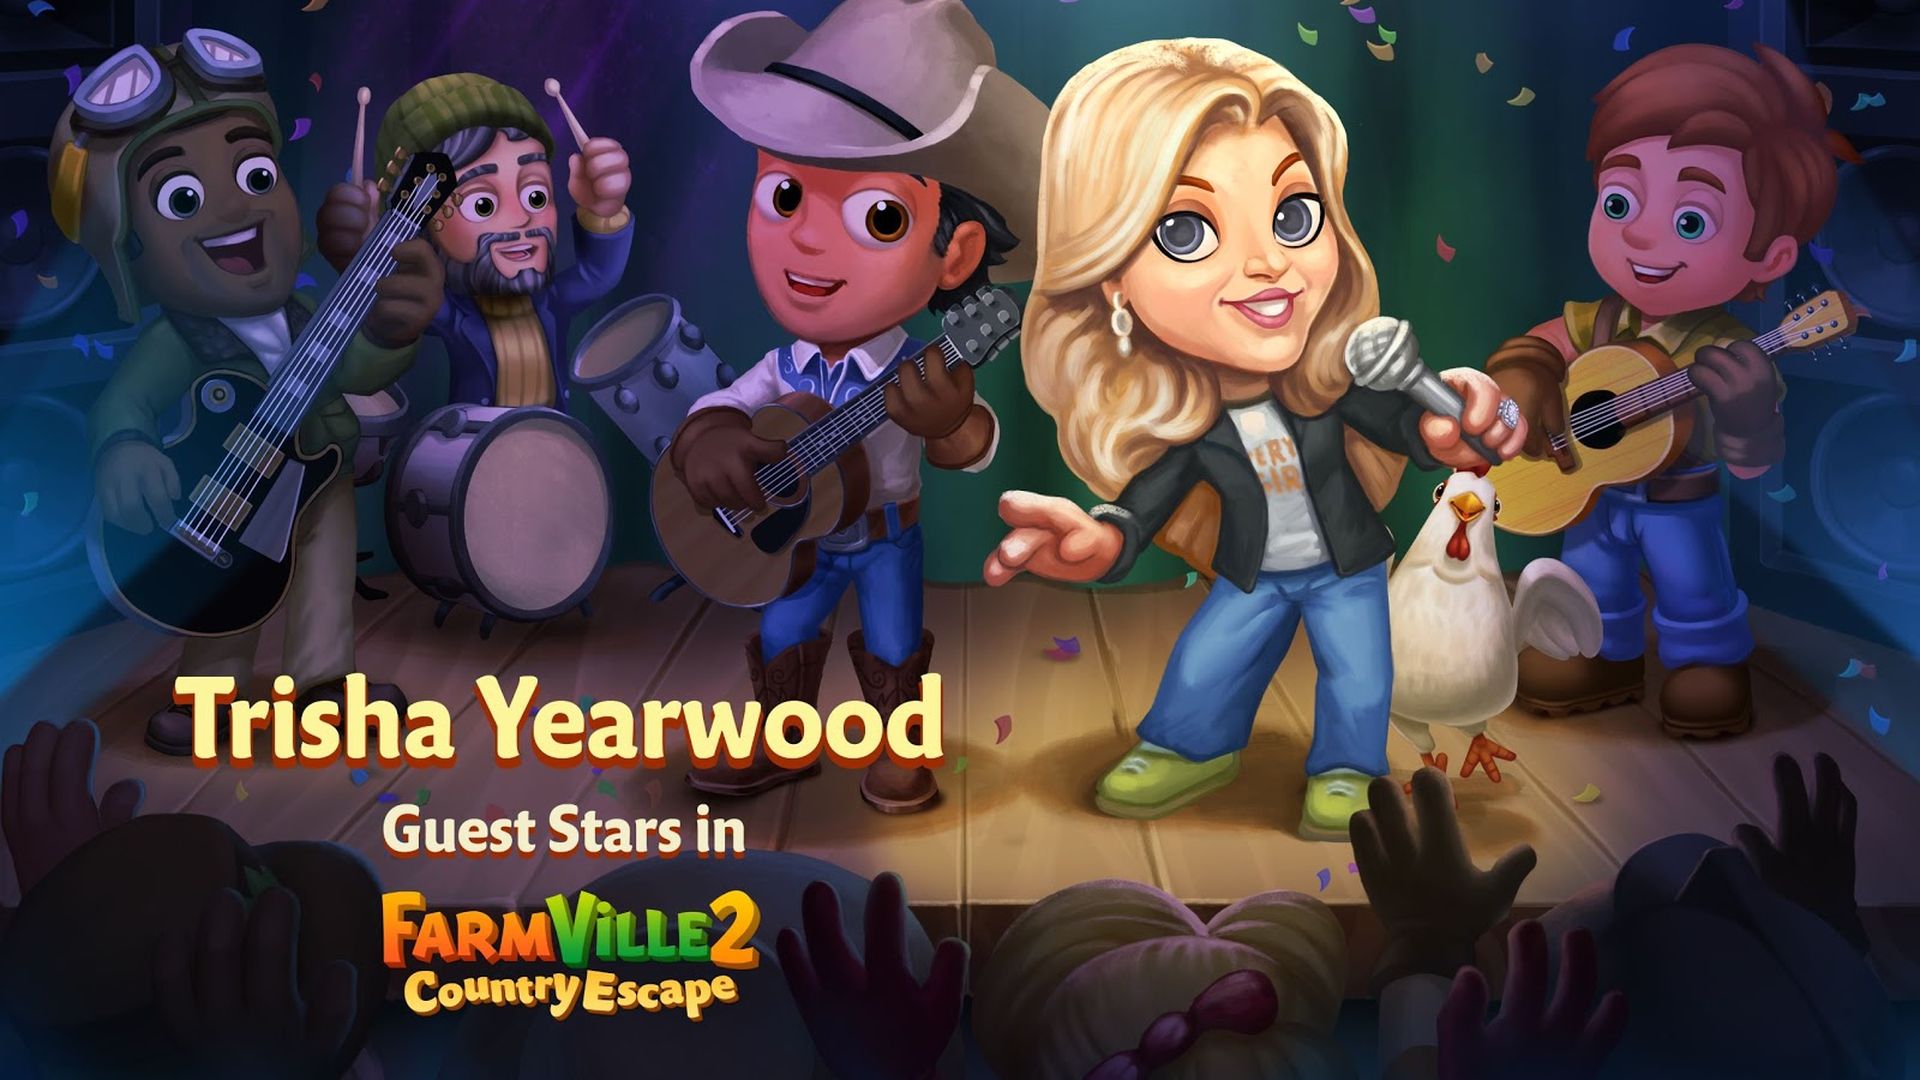 A promotional image of Trisha Yearwood's avatar in Farmville 2